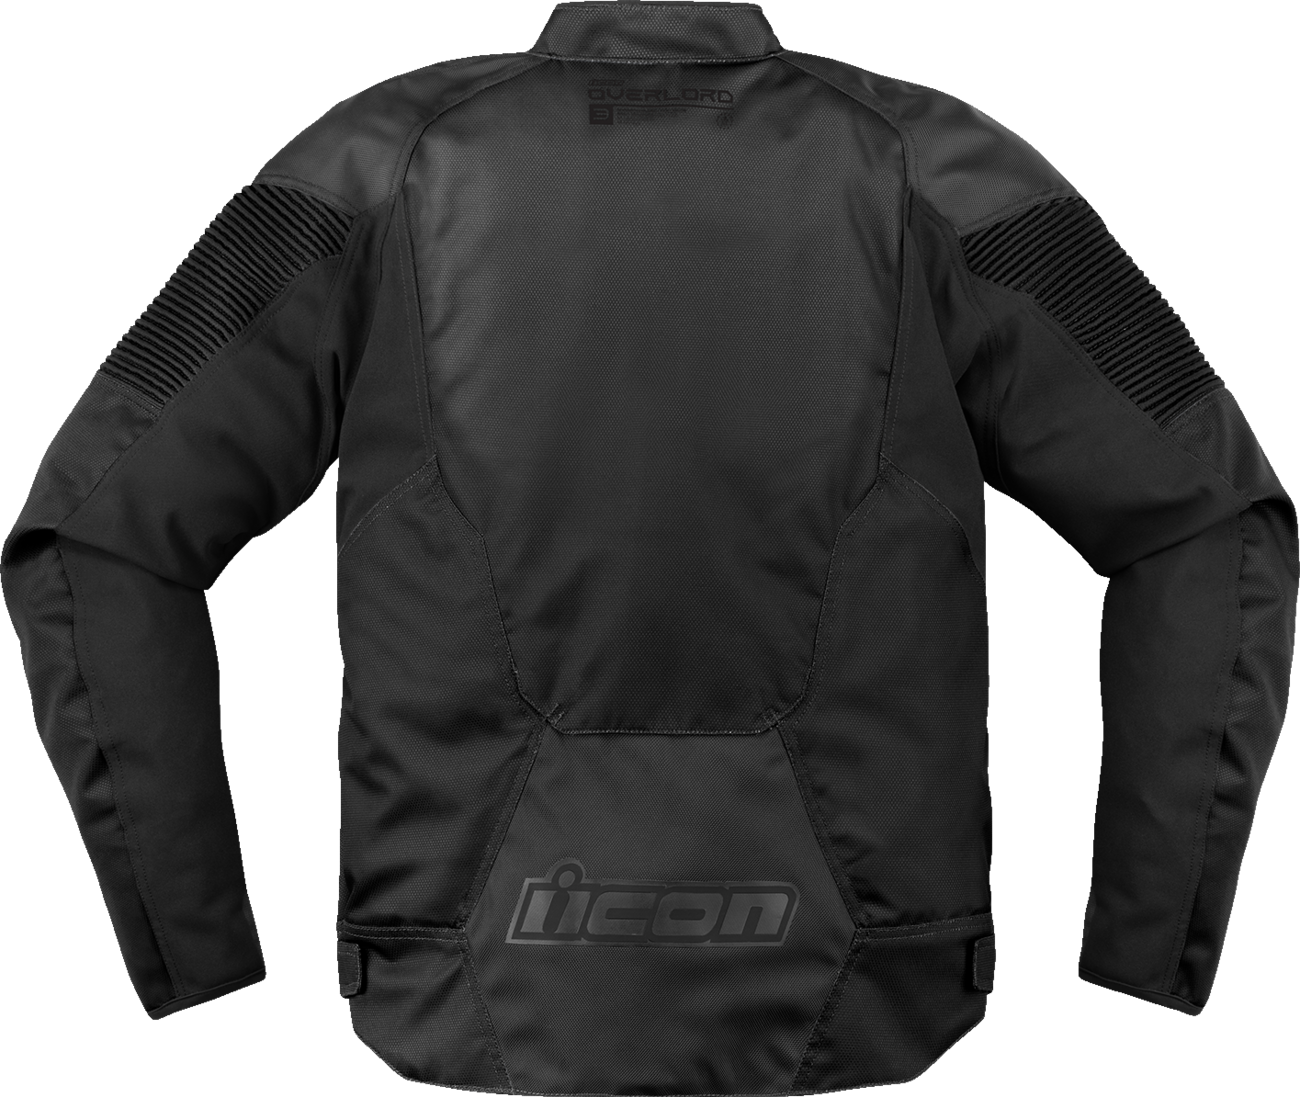 ICON Overlord3™ CE Jacket - Black - XL 2820-6690